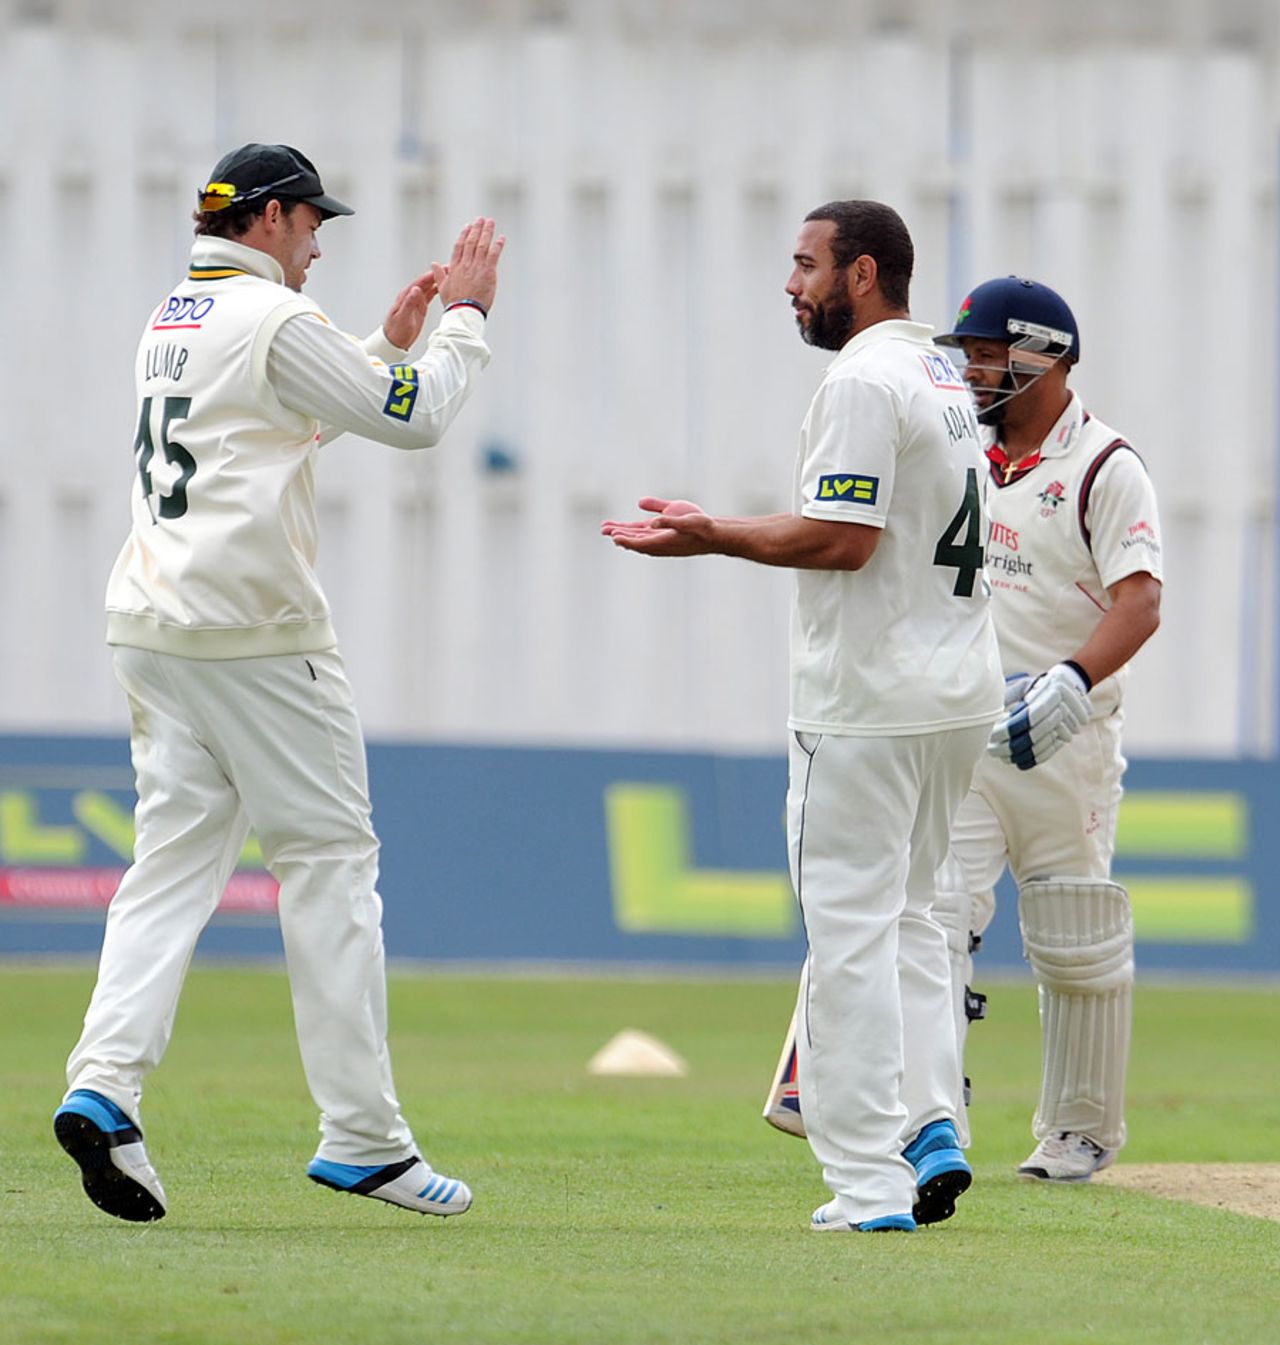 Andre Adams picked up four wickets, Lancashire v Nottinghamshire, County Championship, Division One, Aigburth, 1st day, July 13, 2014